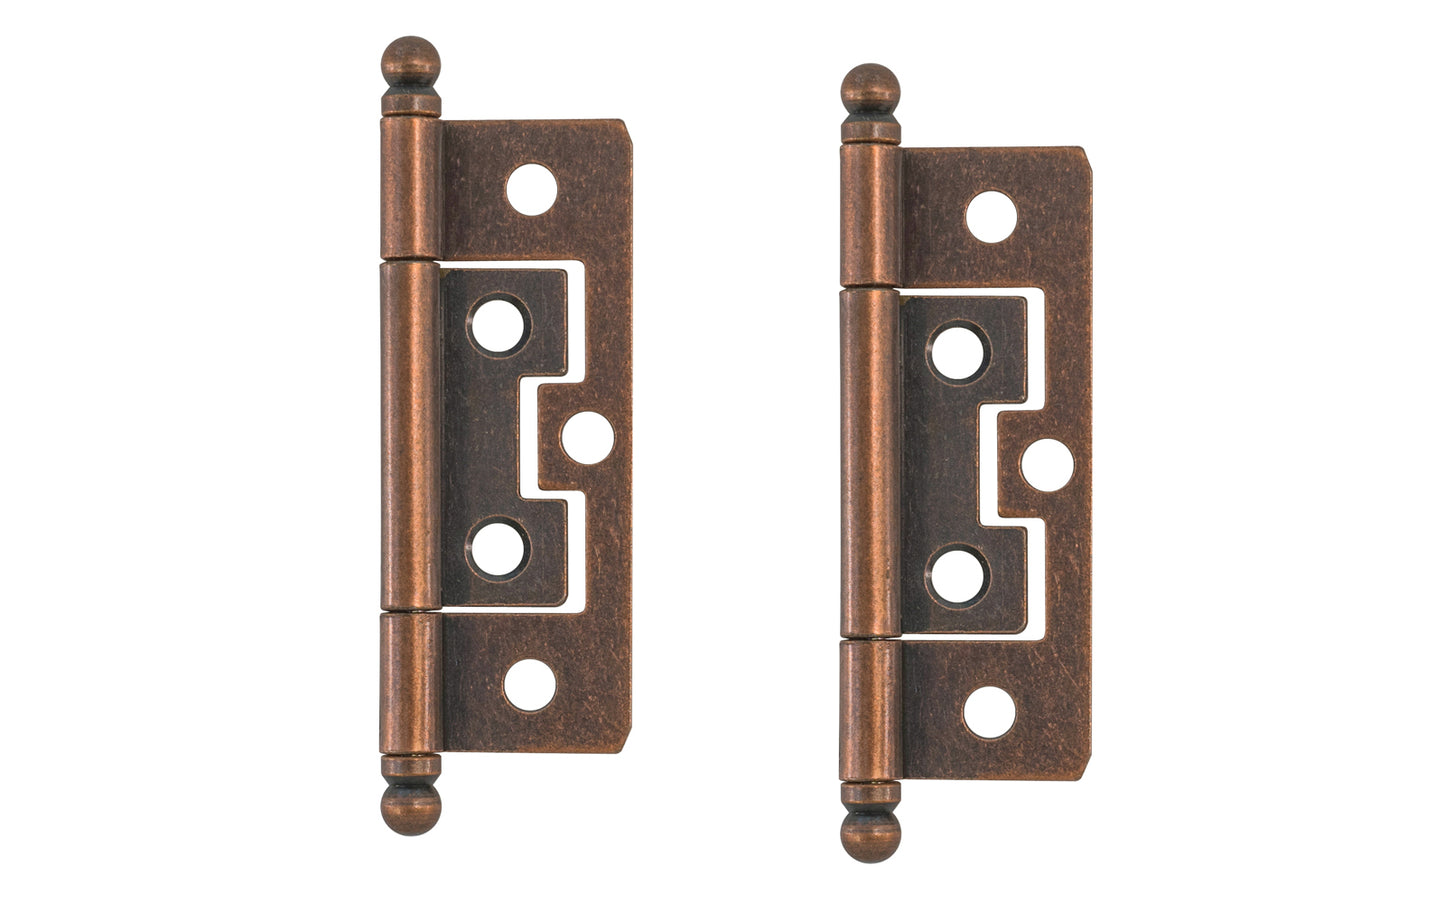 Traditional & classic 2-1/2" size non-mortise ball-tip steel cabinet hinges. Surface mount & great for inset cabinet doors & bi-fold doors. These steeple tip finial hinges are designed in the early 20th century style / Arts and Crafts style of hardware. Antique copper finish on steel material. Two hinges in pack.